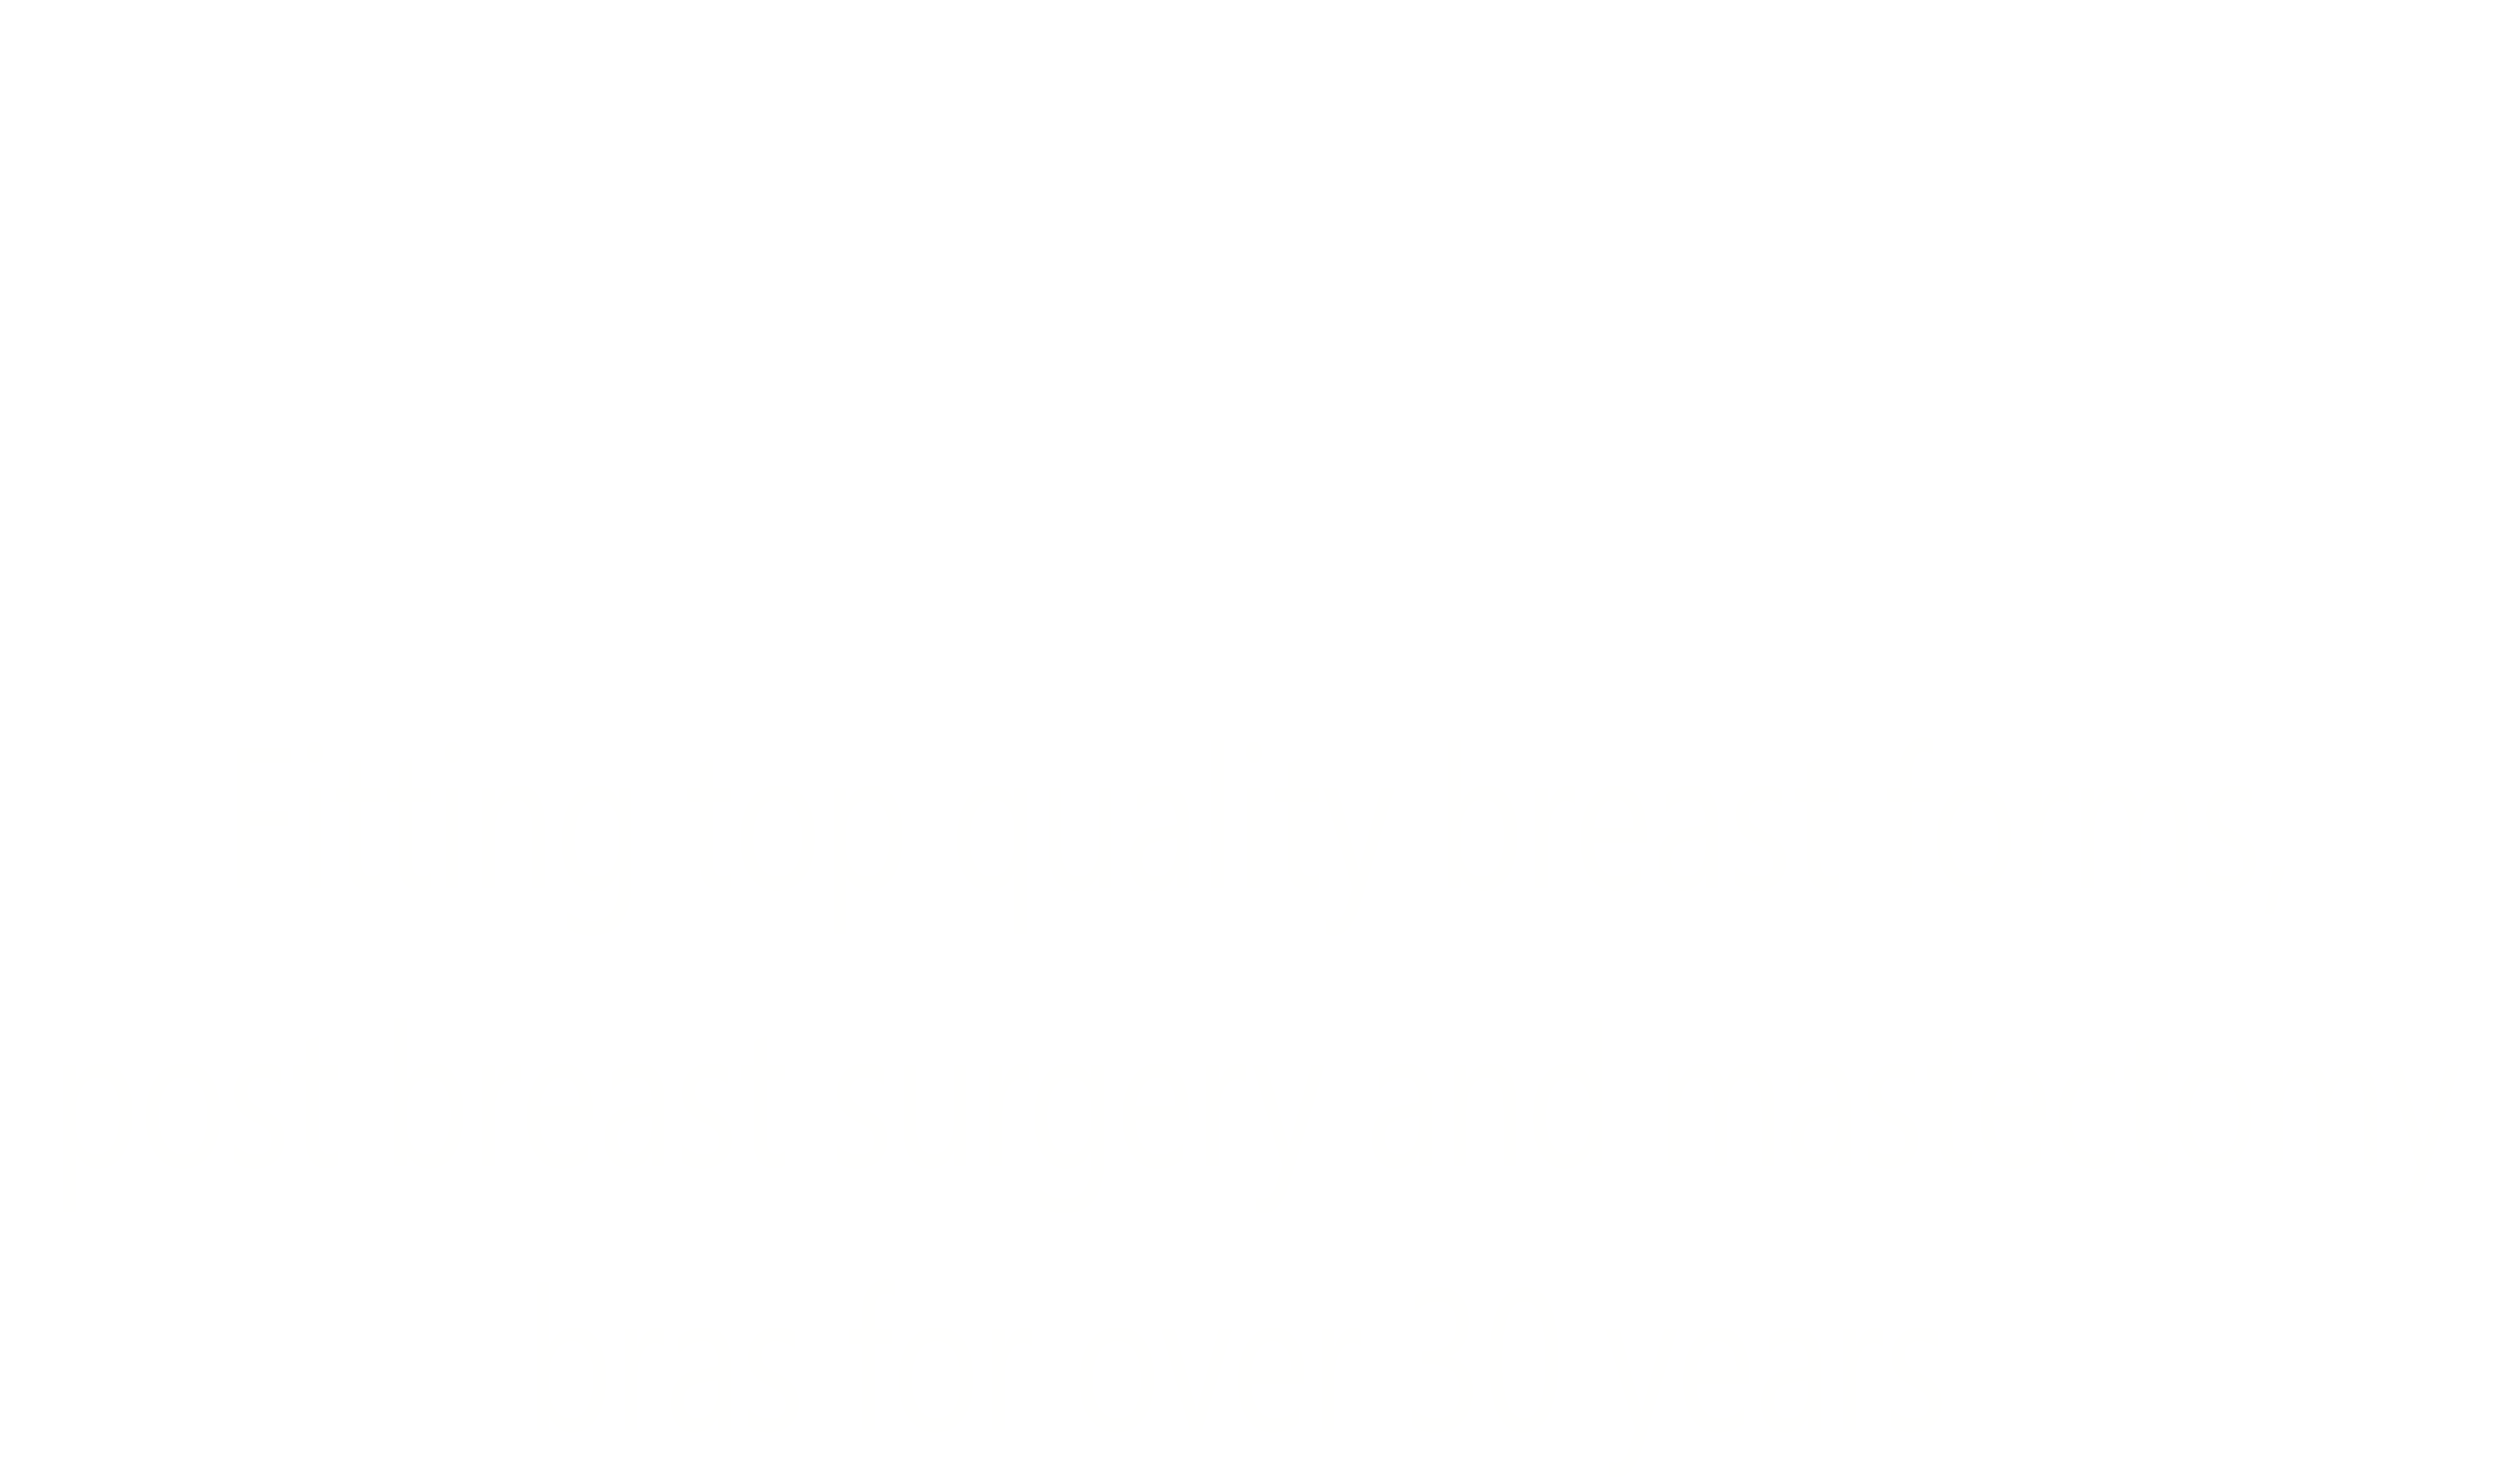 Nearly Me Breast Forms – Nearlyou